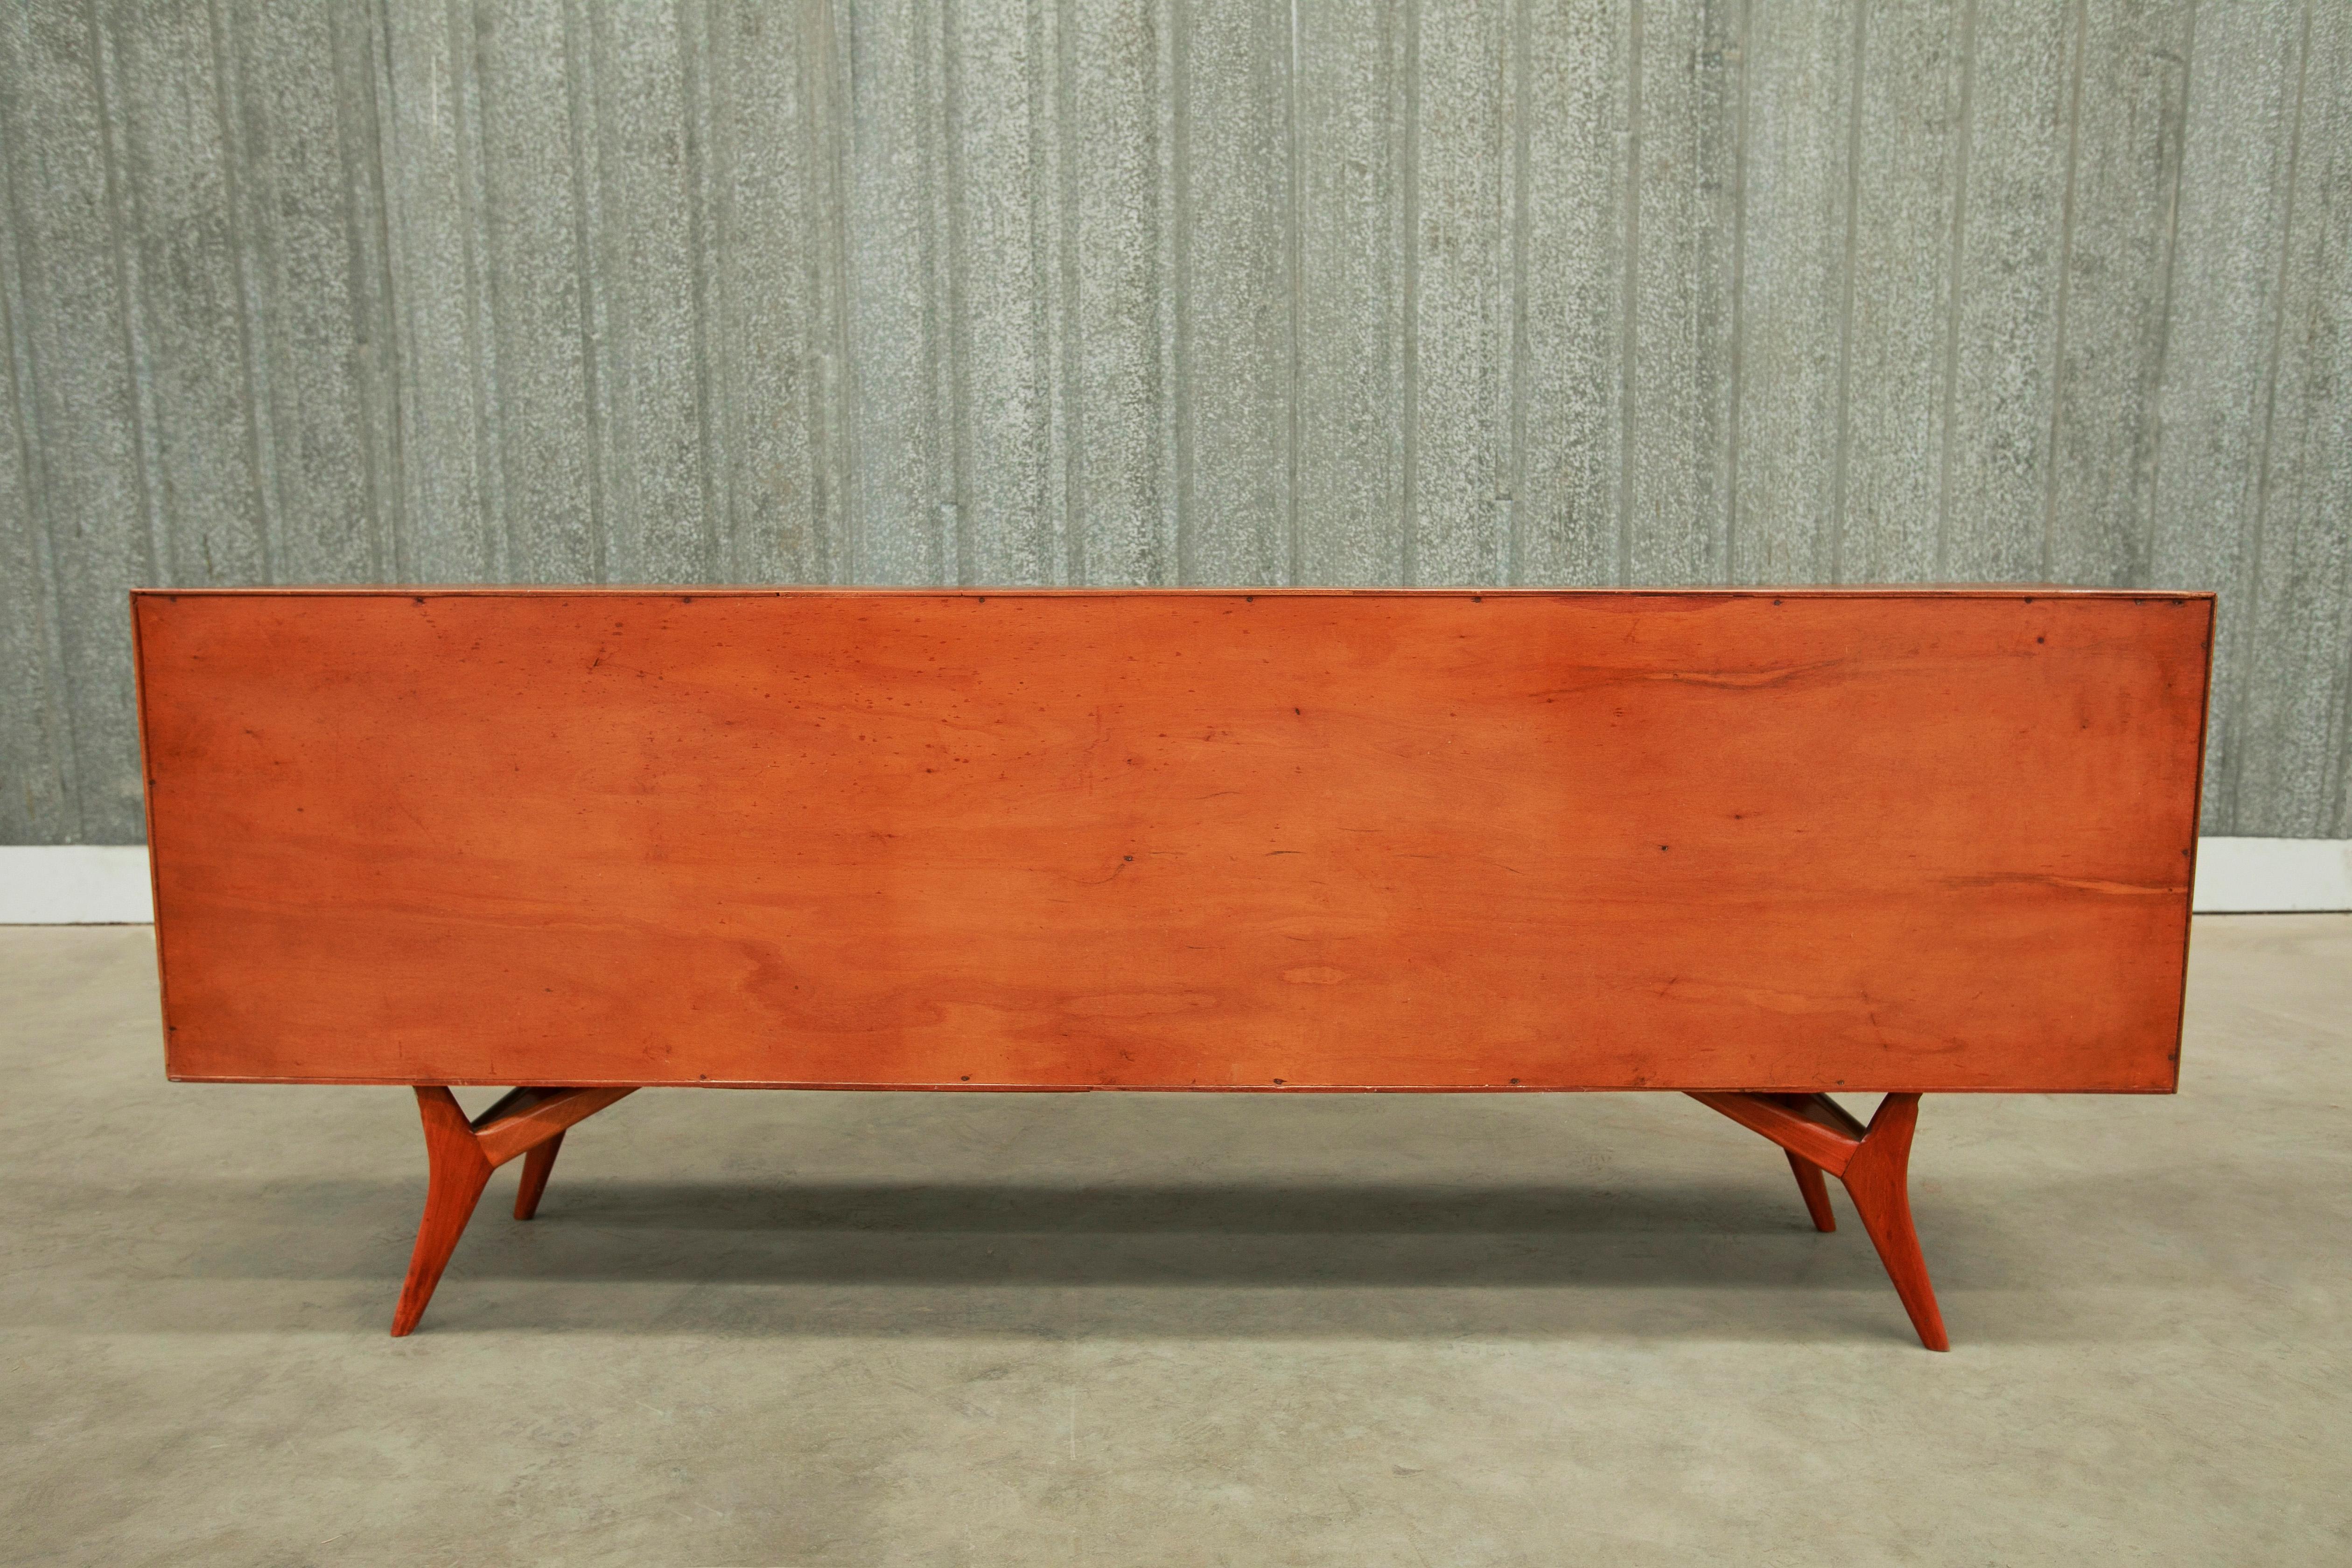 1950s Brazilian Modern Credenza in Hardwood & Caning by Forma In Good Condition For Sale In New York, NY